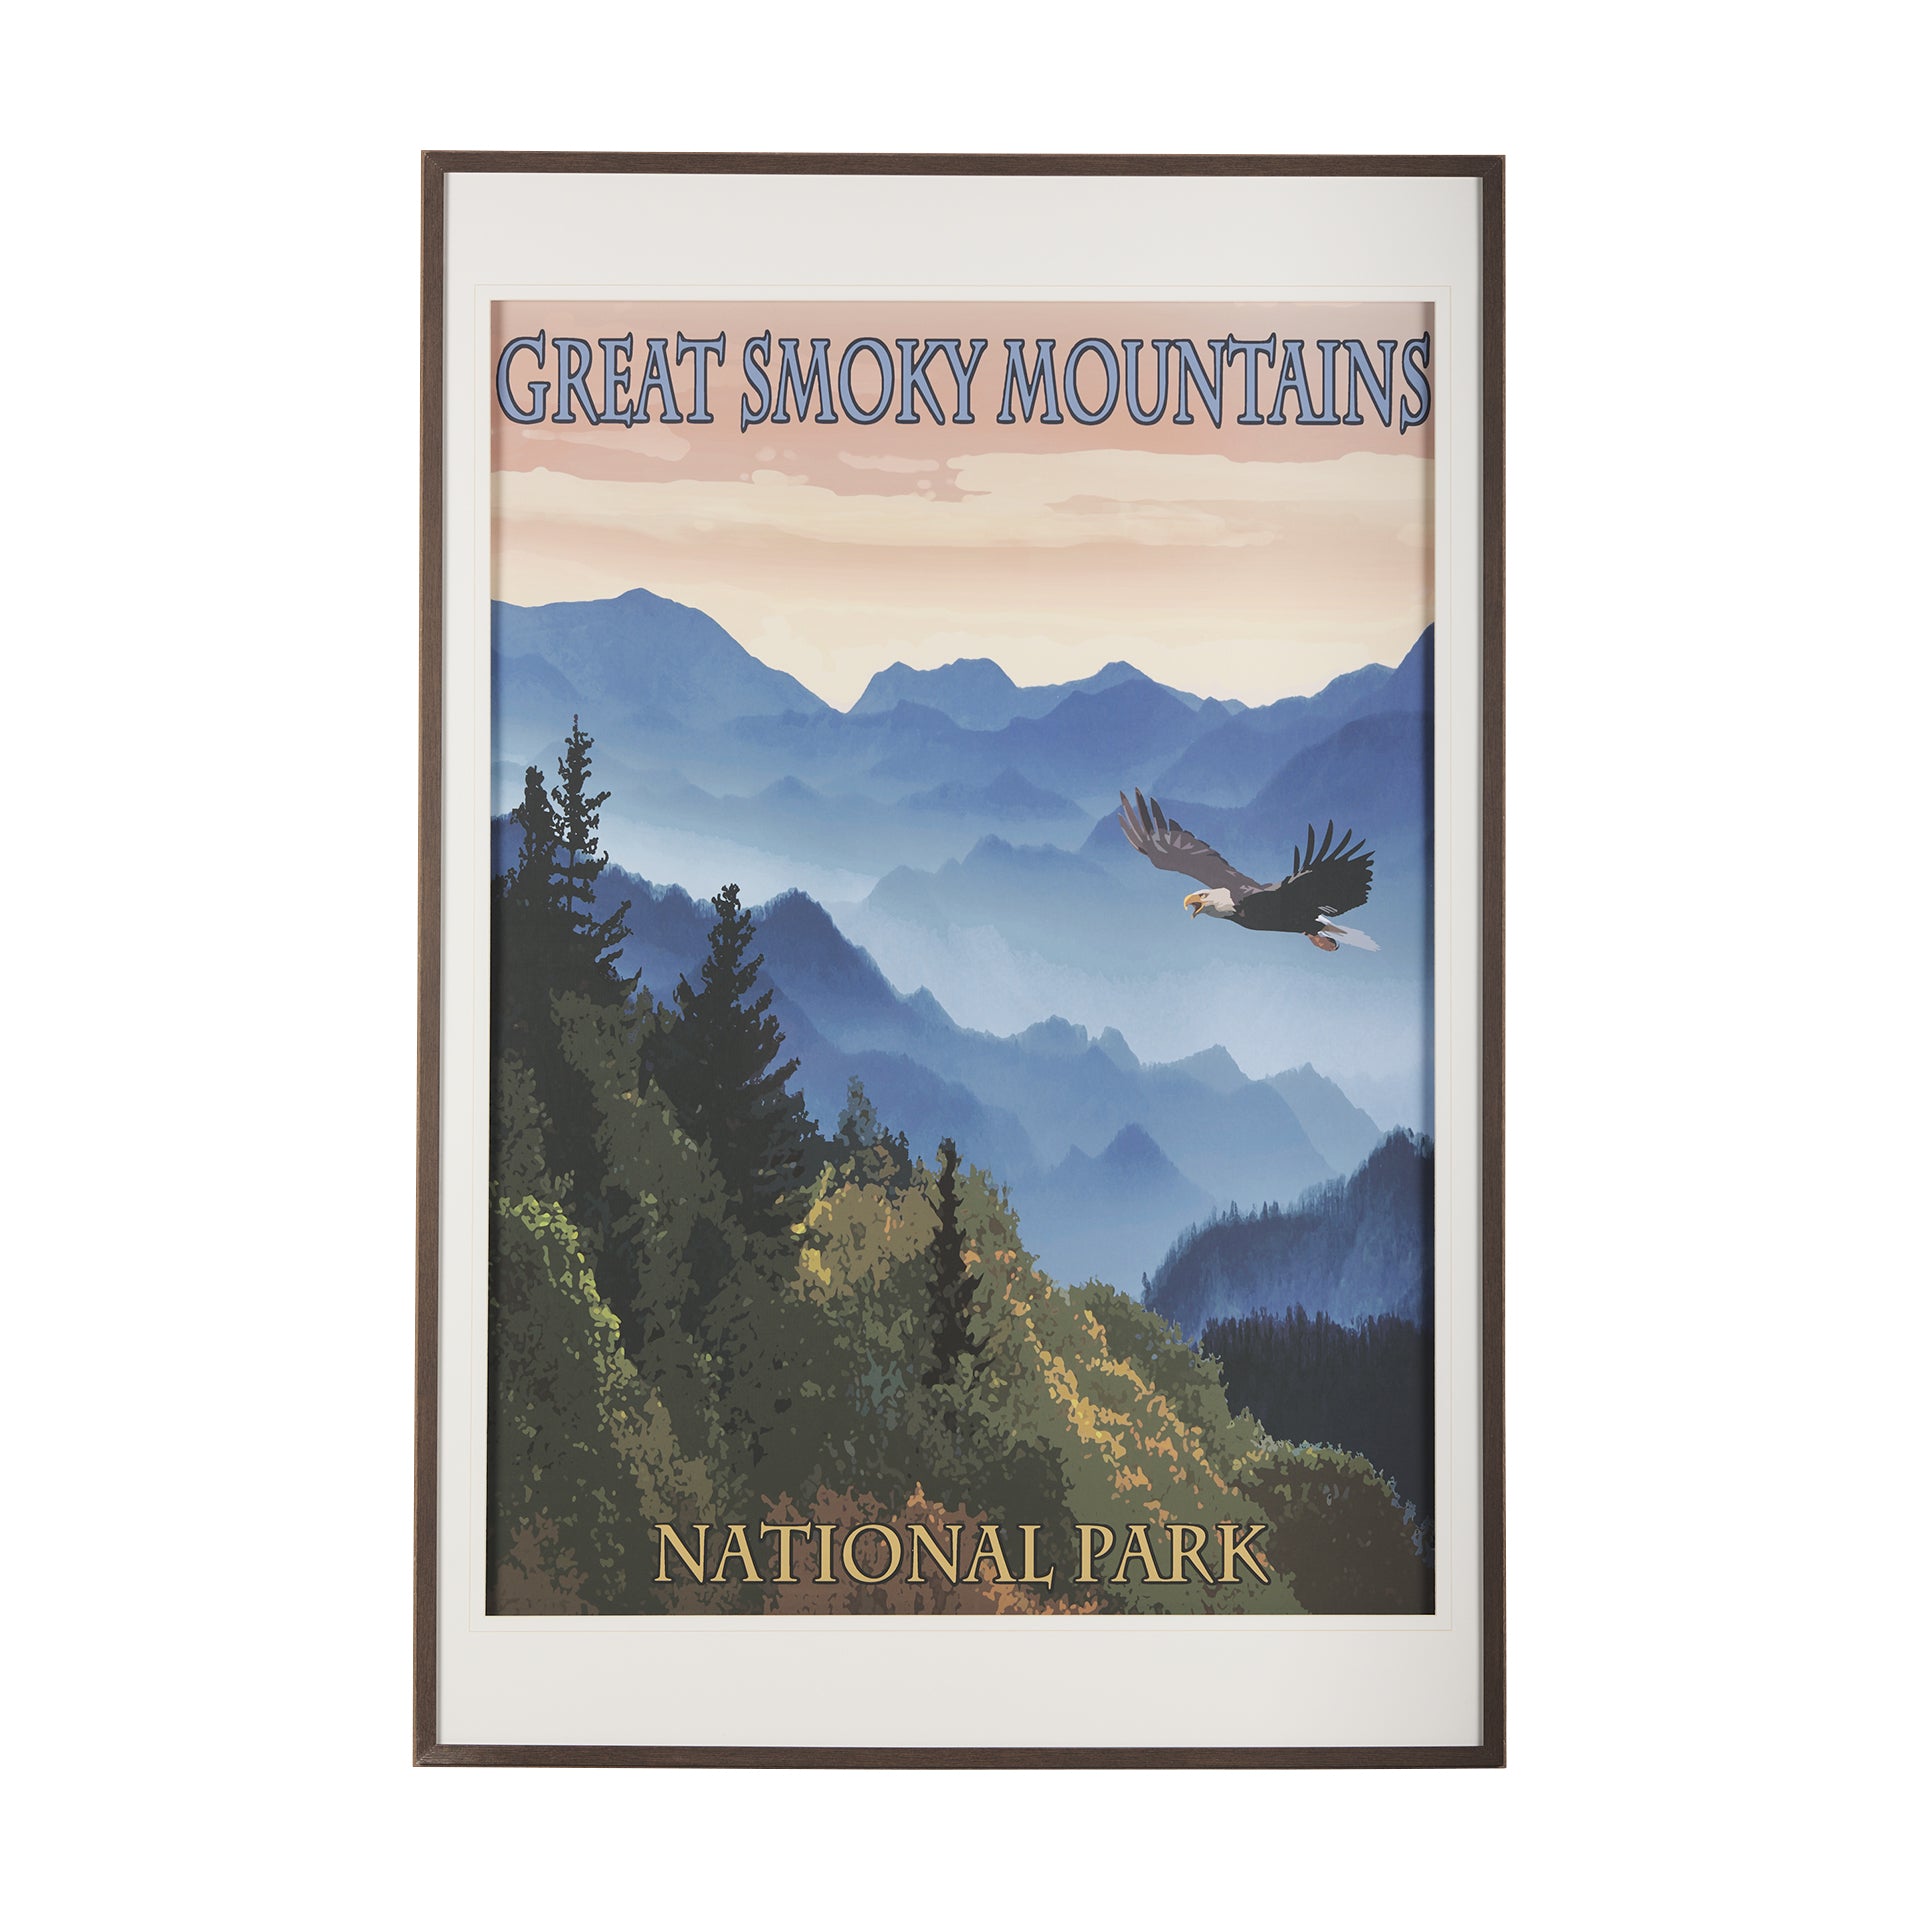 Great Smoky Mountains Framed Art